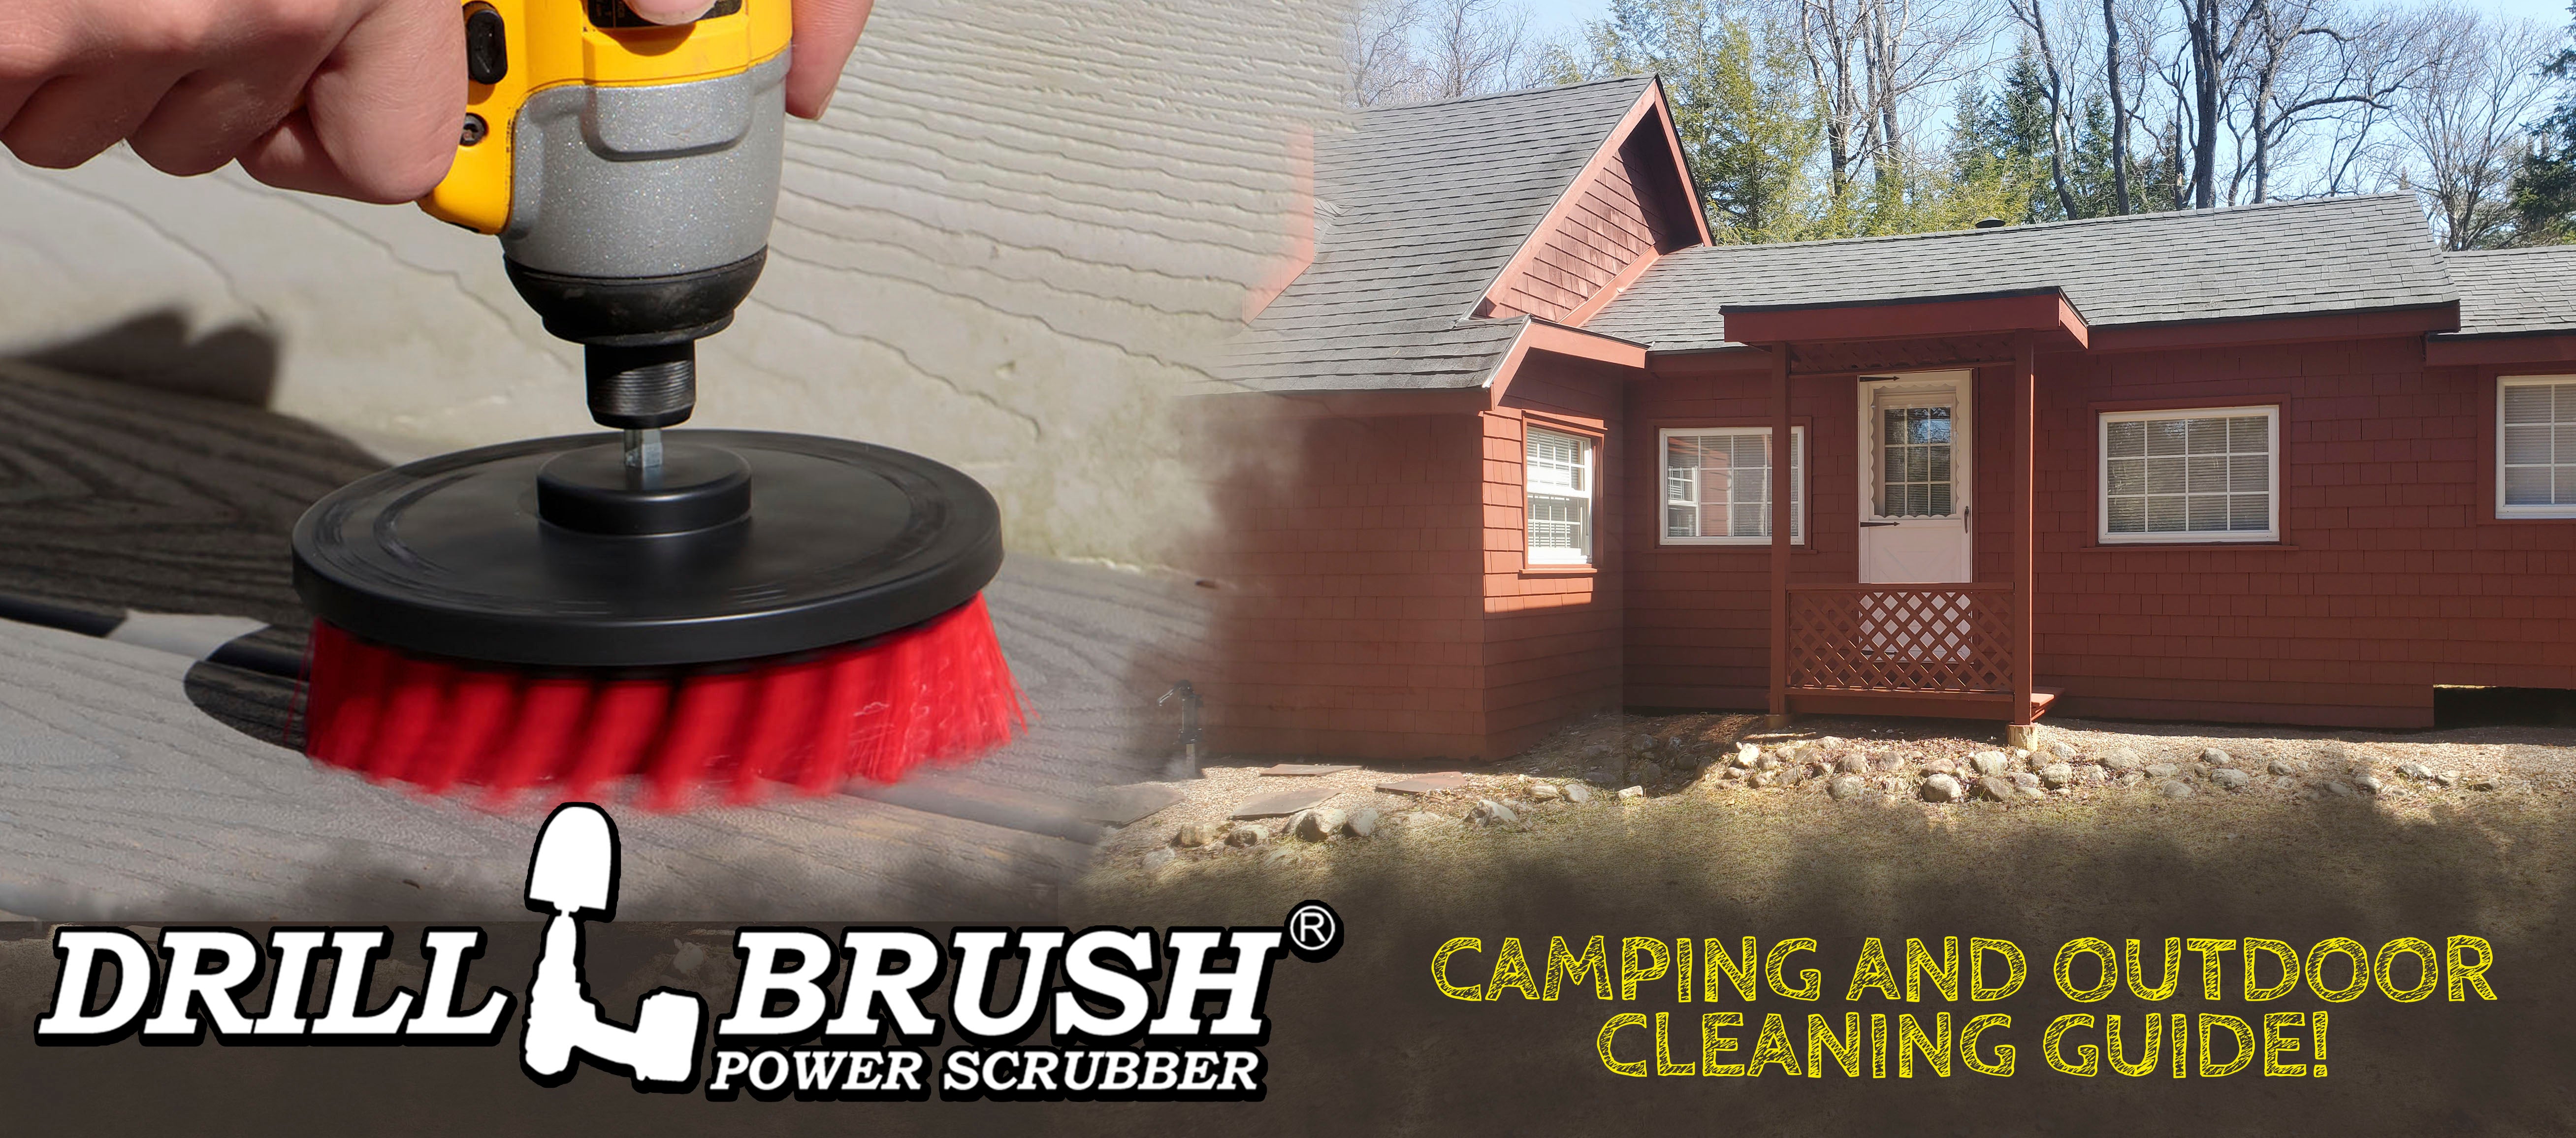 Keeping Clean While Camping - Using a Drillbrush for Outdoor, RV, Boating, Fishing, and Other Summer Activities!